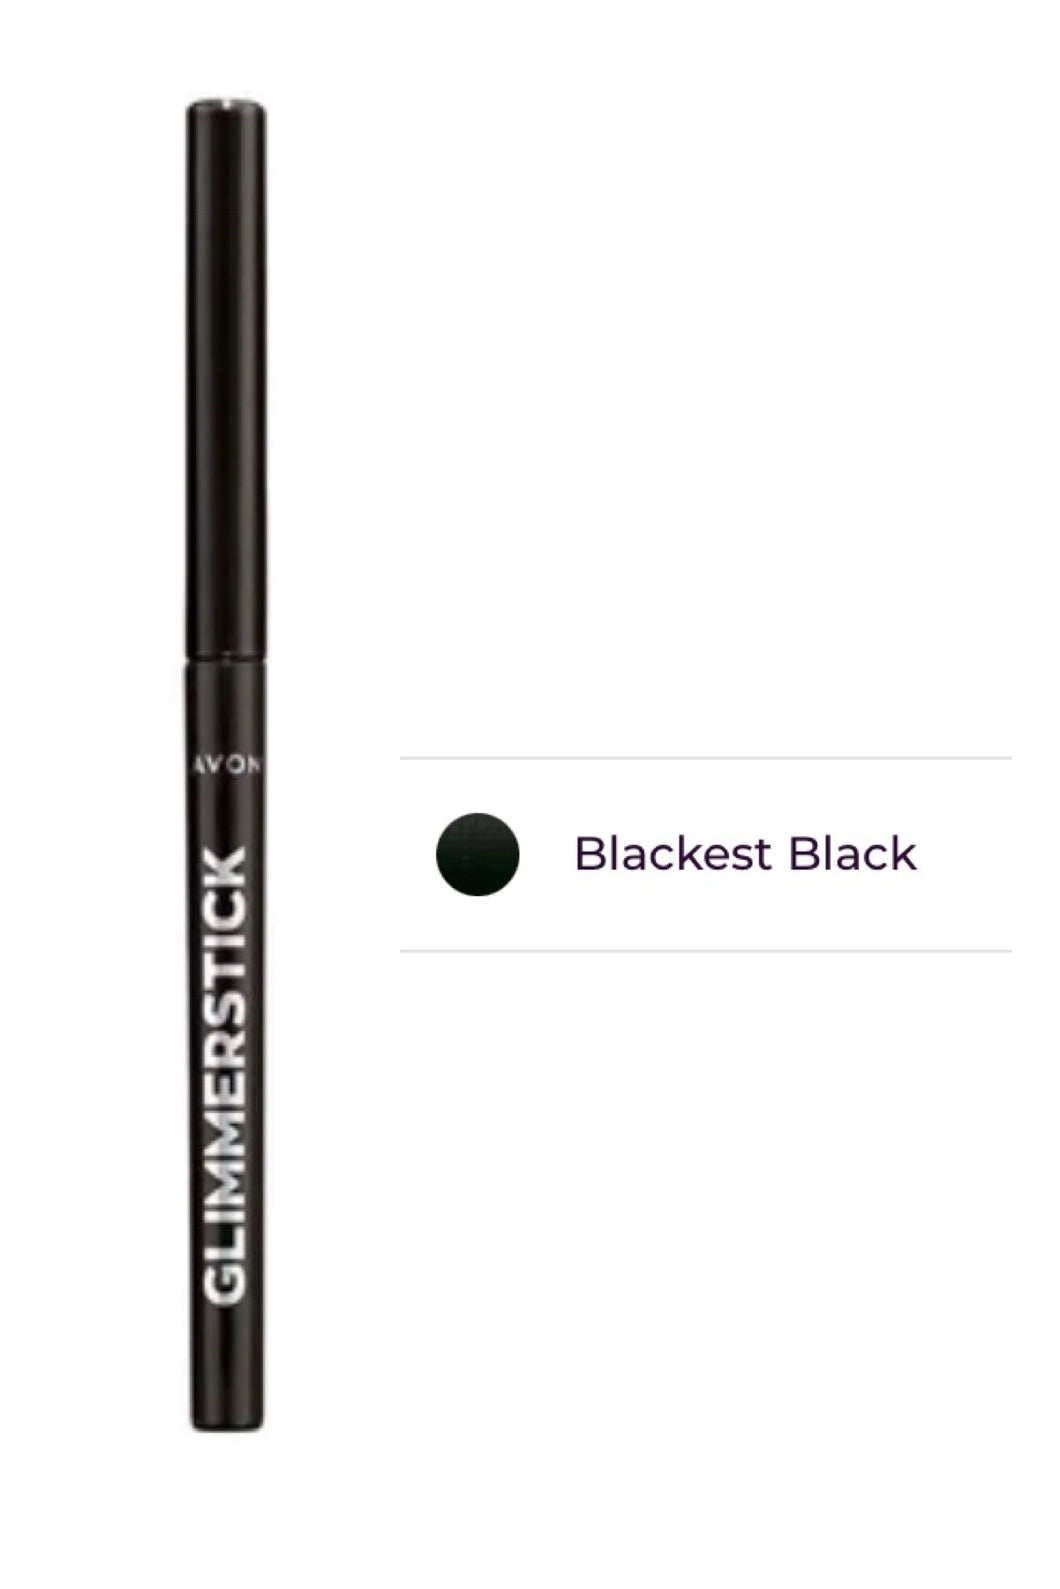 Blackest Black Retractable Glimmerstick Eyeliner UK. No box/wrapping